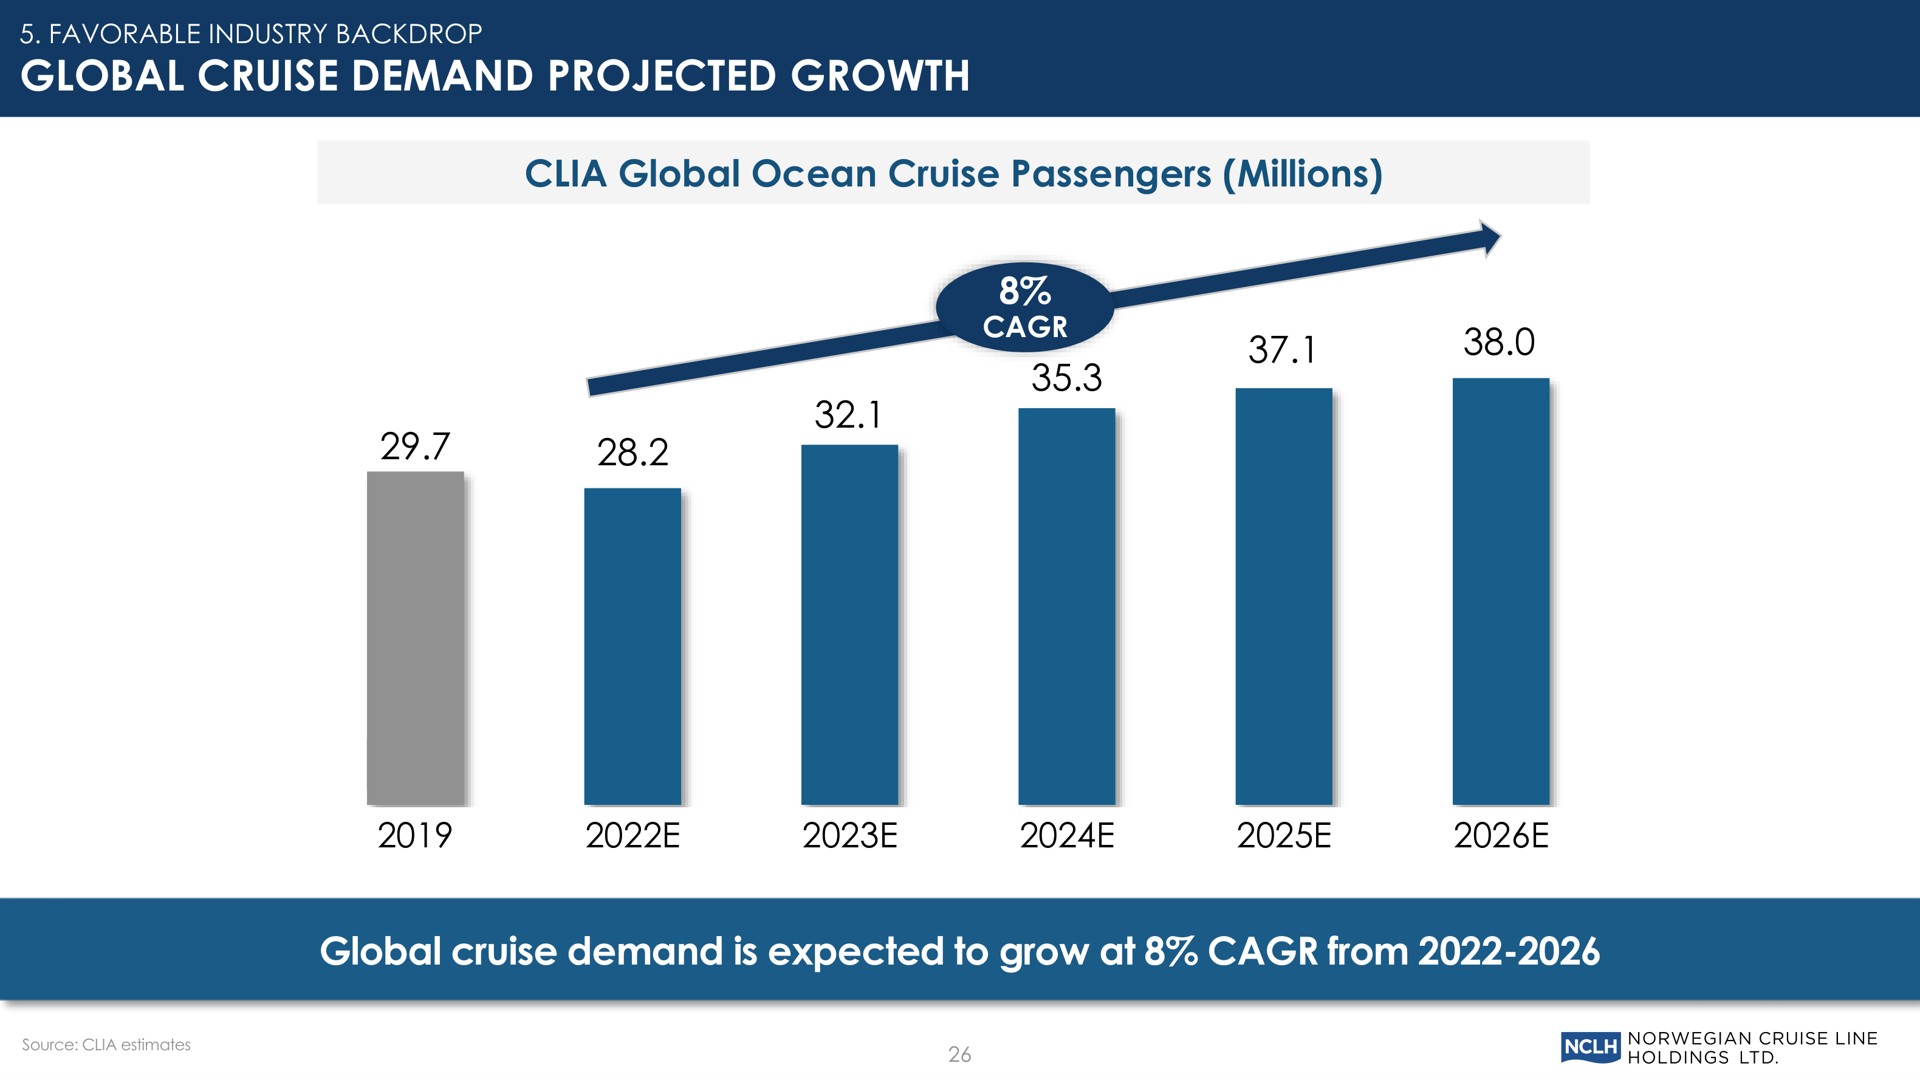 global cruise demand projected growth global cruise demand is expected to grow at from favorable industry backdrop | Norwegian Cruise Line